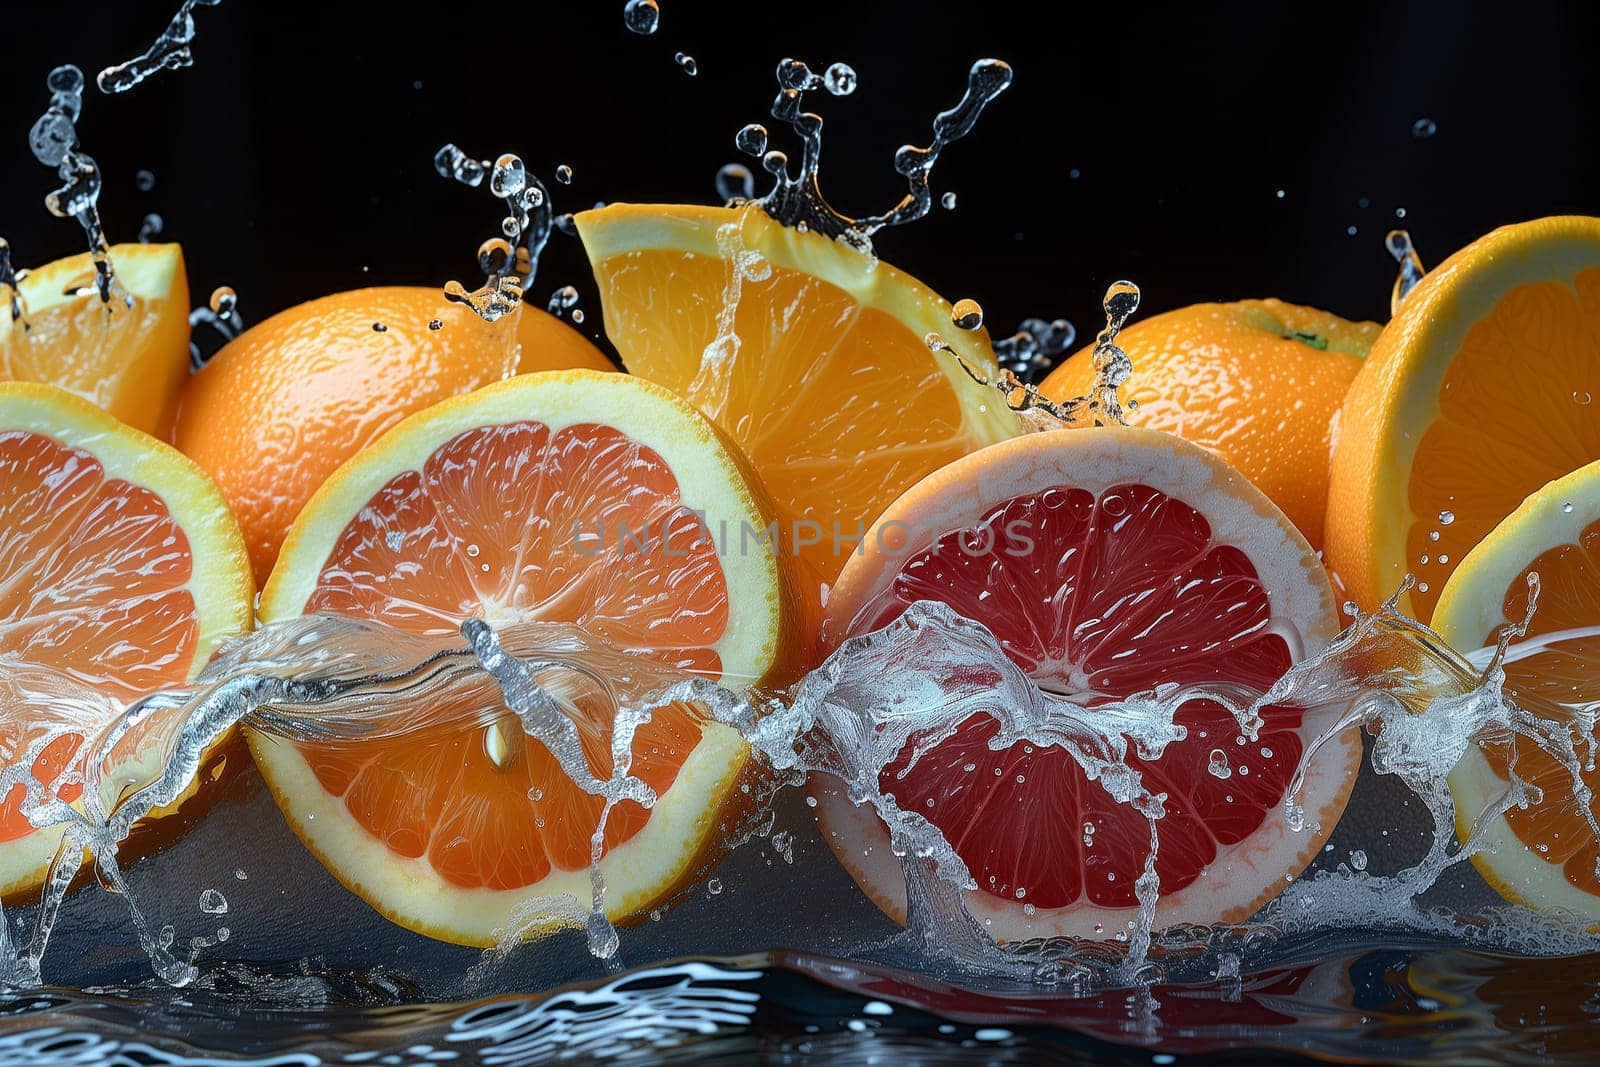 Citrus fruits like grapefruit, oranges, and lemons are happily splashing in the water, adding a refreshing touch of color and zest to the scene